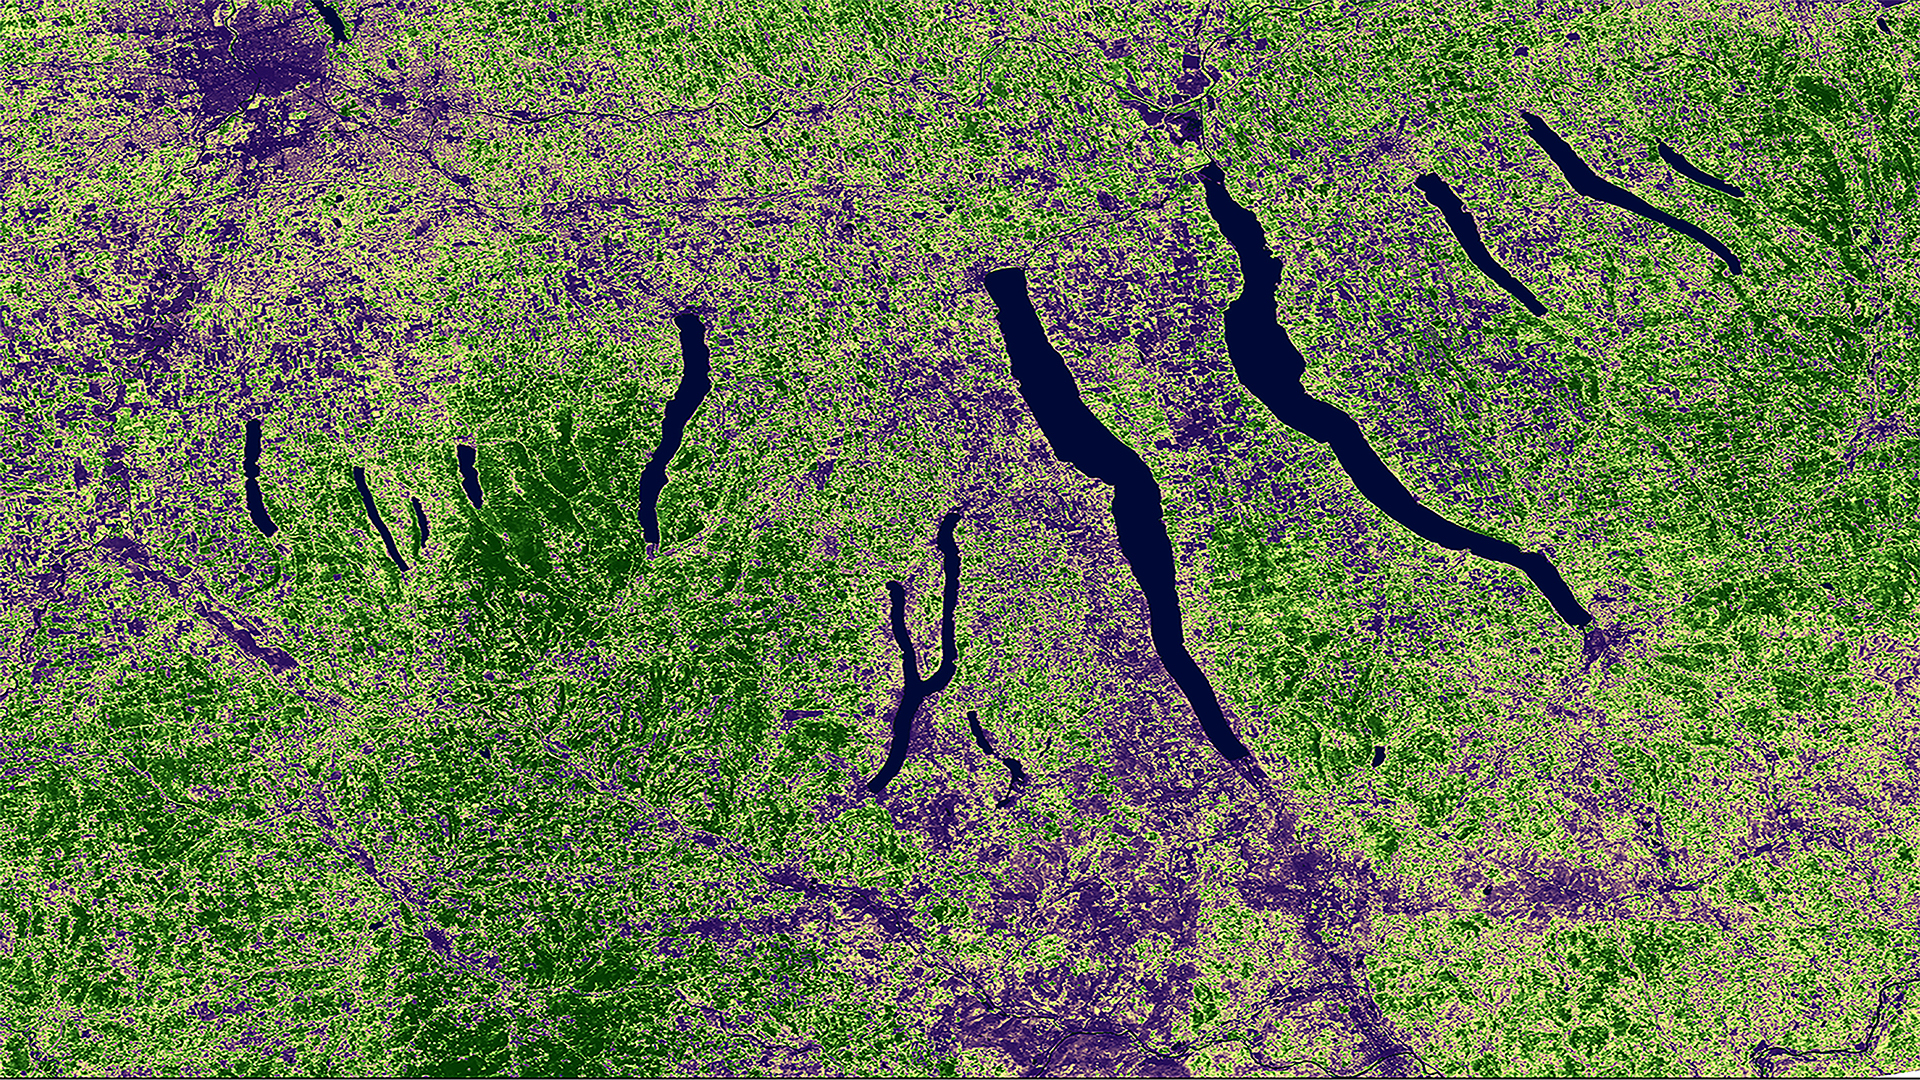 Enhanced Vegetation Index (EVI) calculated from Landsat 8 Operational Land Imager(OLI) in 2019.  Central New York is a high production region for maple syrup. Purple pixels indicate urban or highly developed areas, black pixels indicate water, and darker green pixels represent highly vegetated areas. Areas of higher vegetation will be more suitable for sugarbush locations. This will help maple producers identify suitable sugar maple tree habitats.Keywords: EVI, Landsat 8 OLI, sugarbush, New York